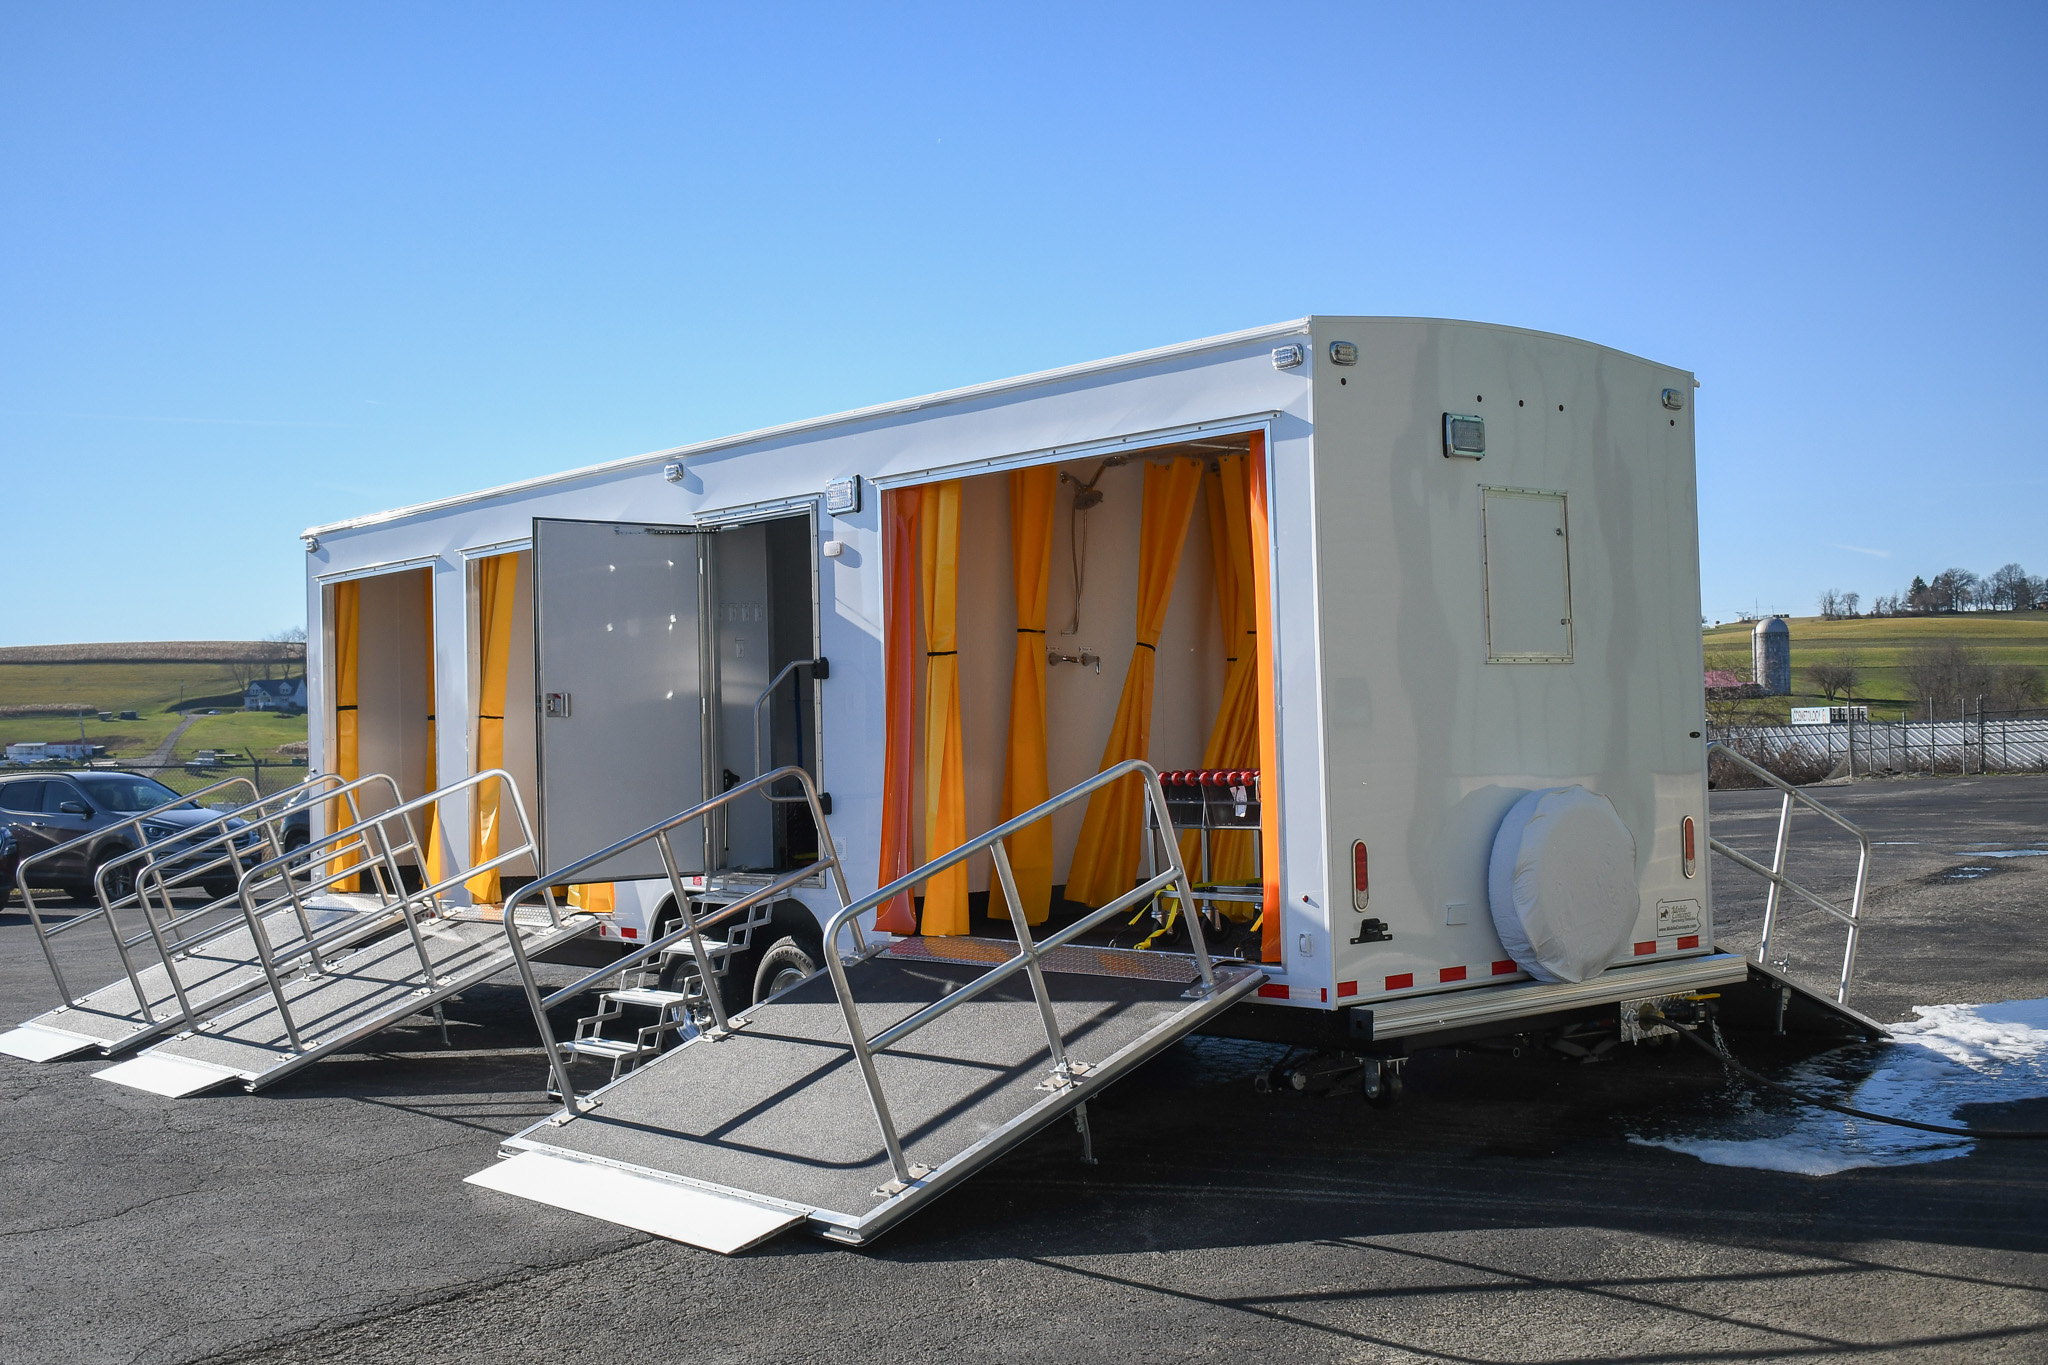 An exterior view of the unit for San Fransisco, CA.